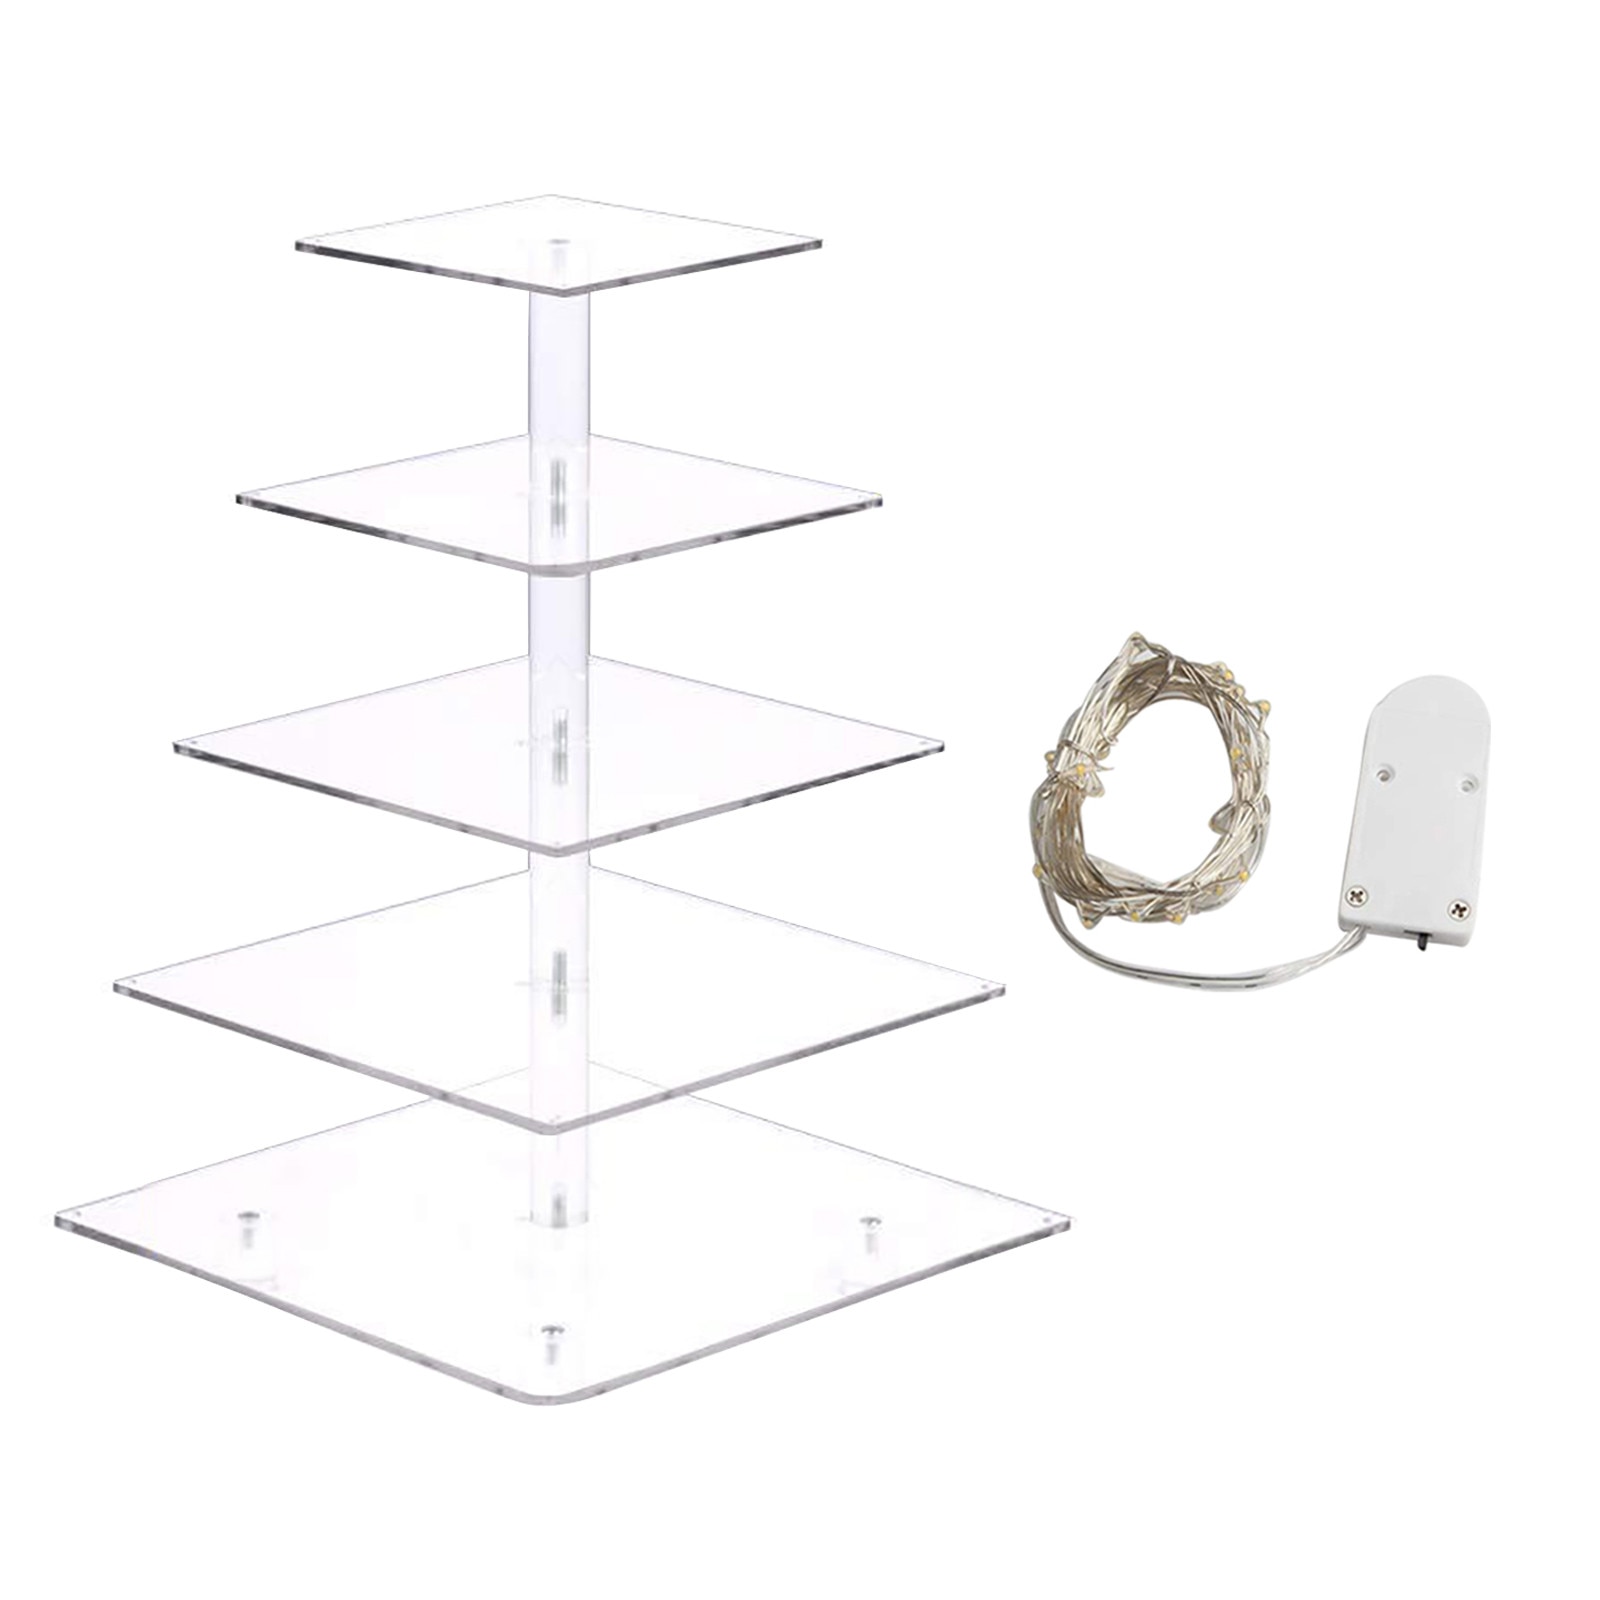 5 Layers Cupcake Stand with LED String Light Wedding Party Display Tower Tray Dessert Cake Holder